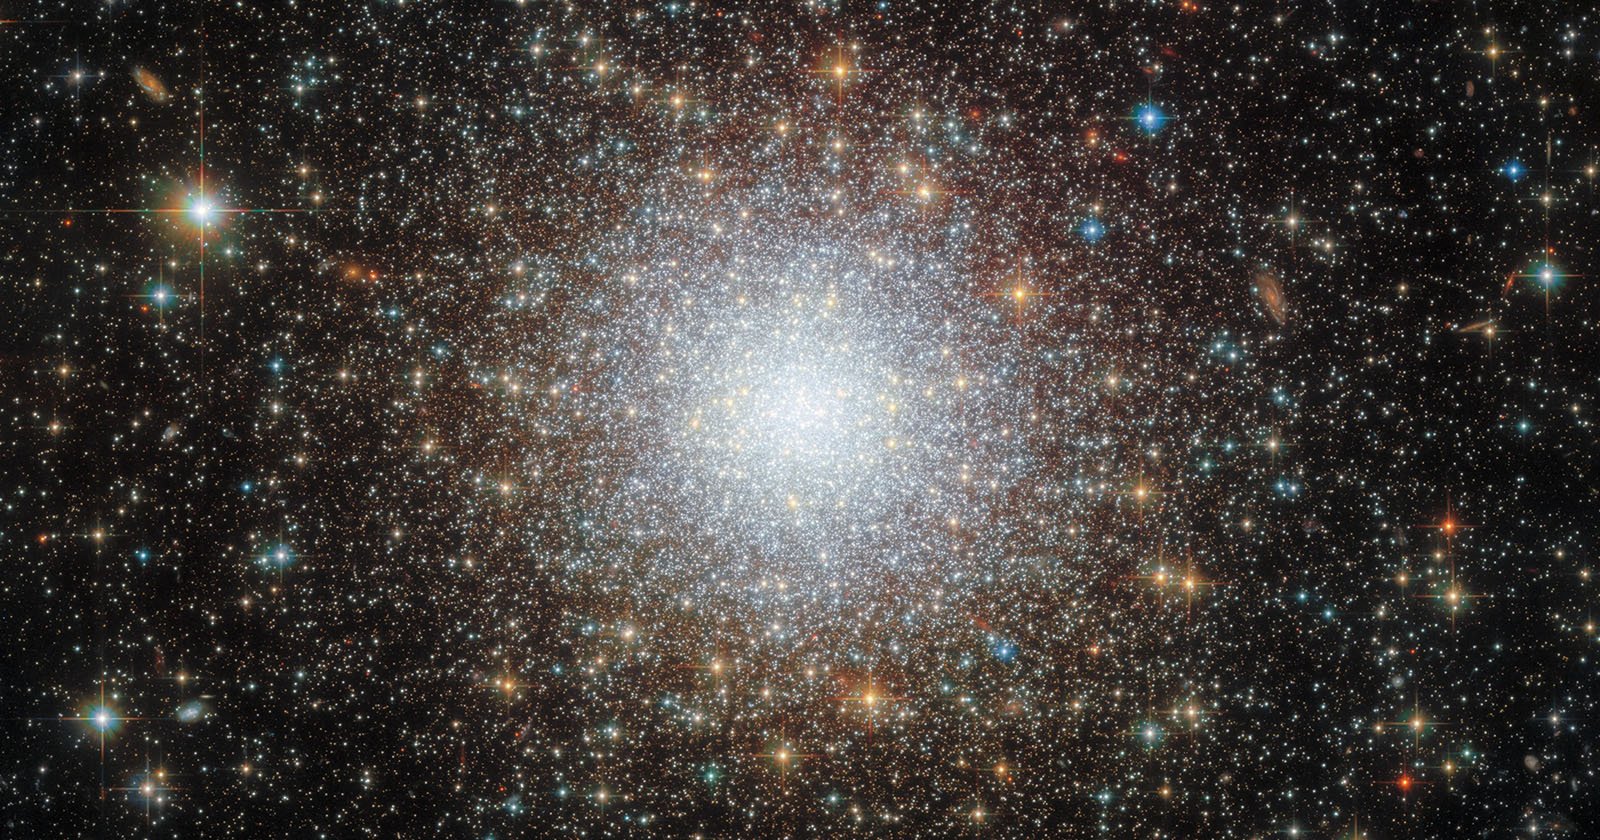 Hubble Reveals Intricate, Beautiful 11.6 Billion-Year-Old Cluster of Stars